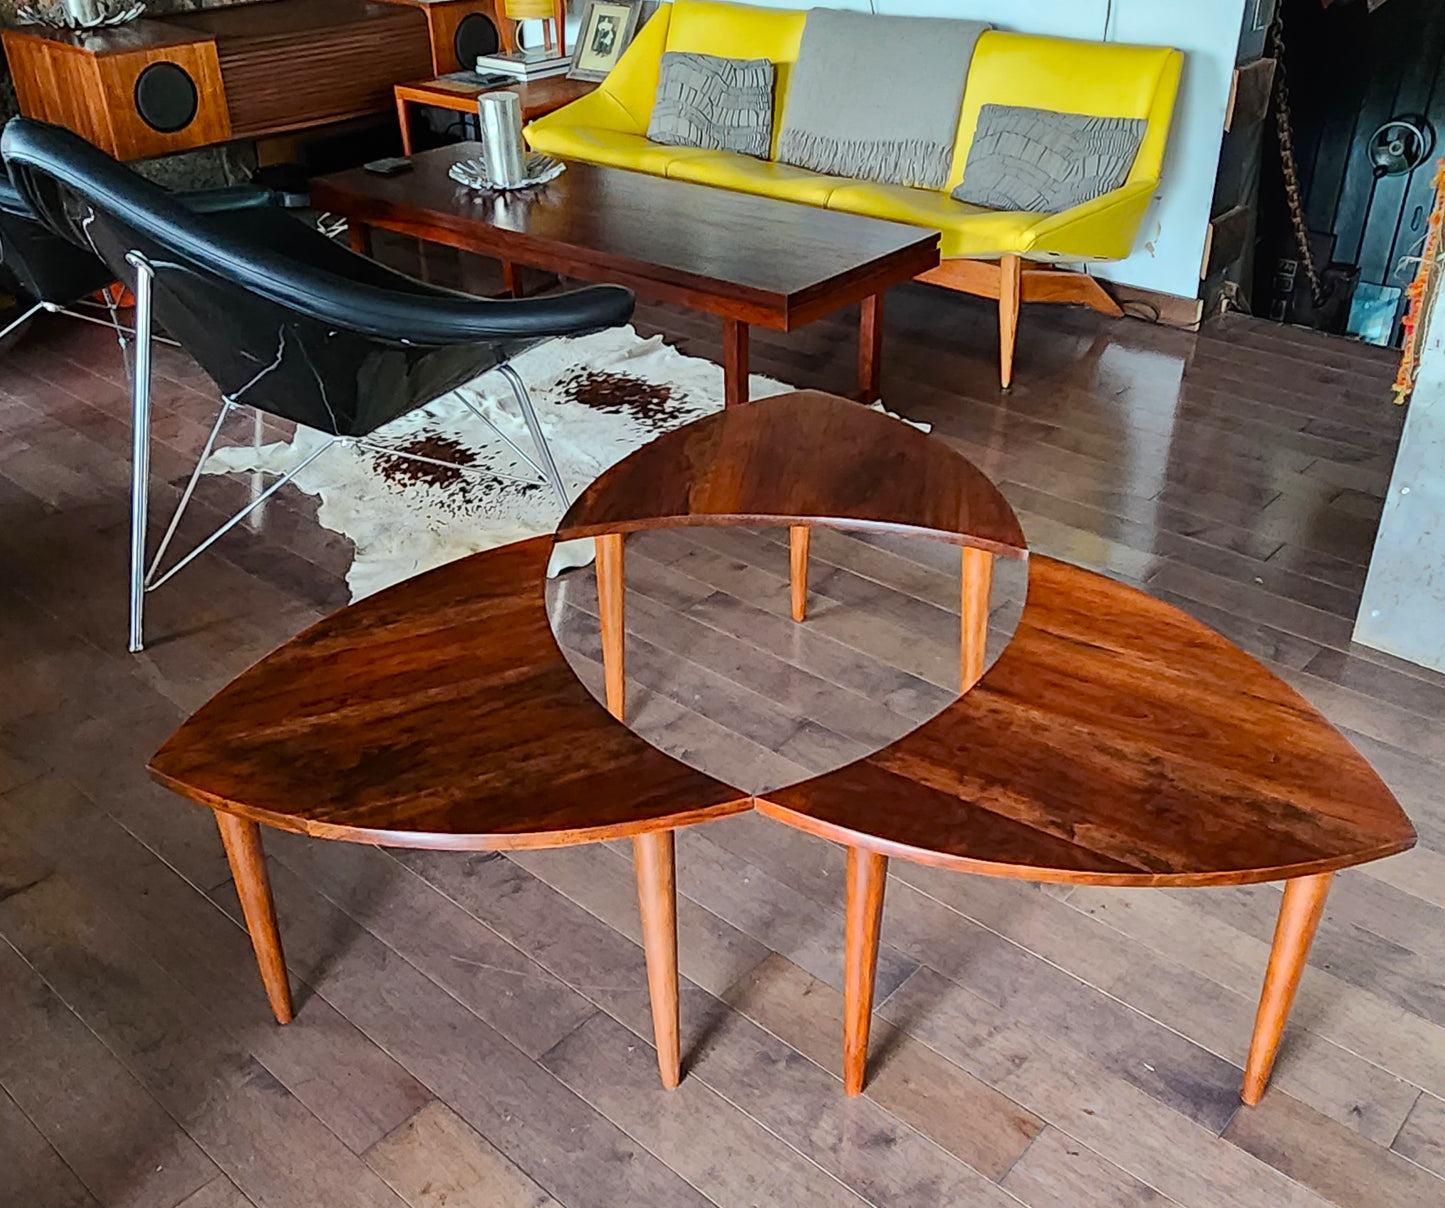 REFINISHED Mid Century Modern segmented triangular accent tables, set of 3